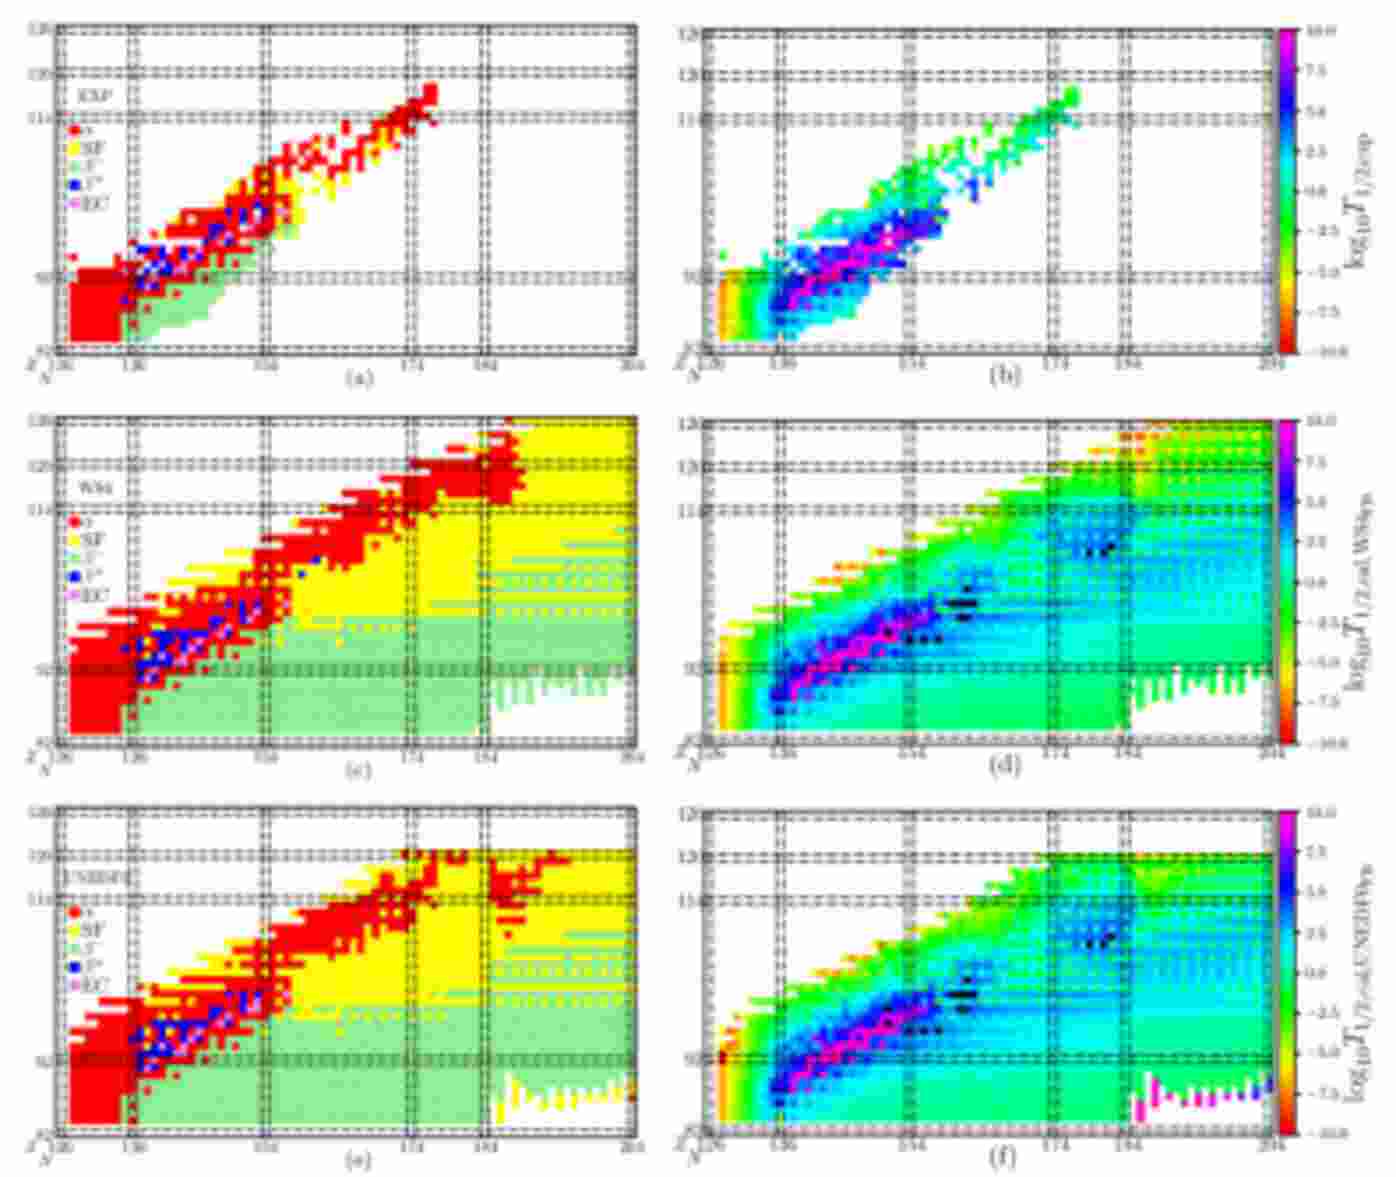 The left panels show the dominant decay modes, while the right panels show the minimum partial half-lives, for α decay, β− decay, β+ decay, EC, and SF. Experimental data can be found in NUBASE2020, while the predicted results from RF can be found in panels c-f. WS4 and UNEDF0 are the sources of predicted energies. The decay energy is replaced with FB to learn SF. The nuclides with a predicted partial half-life longer than 10^4 seconds are marked with a star.